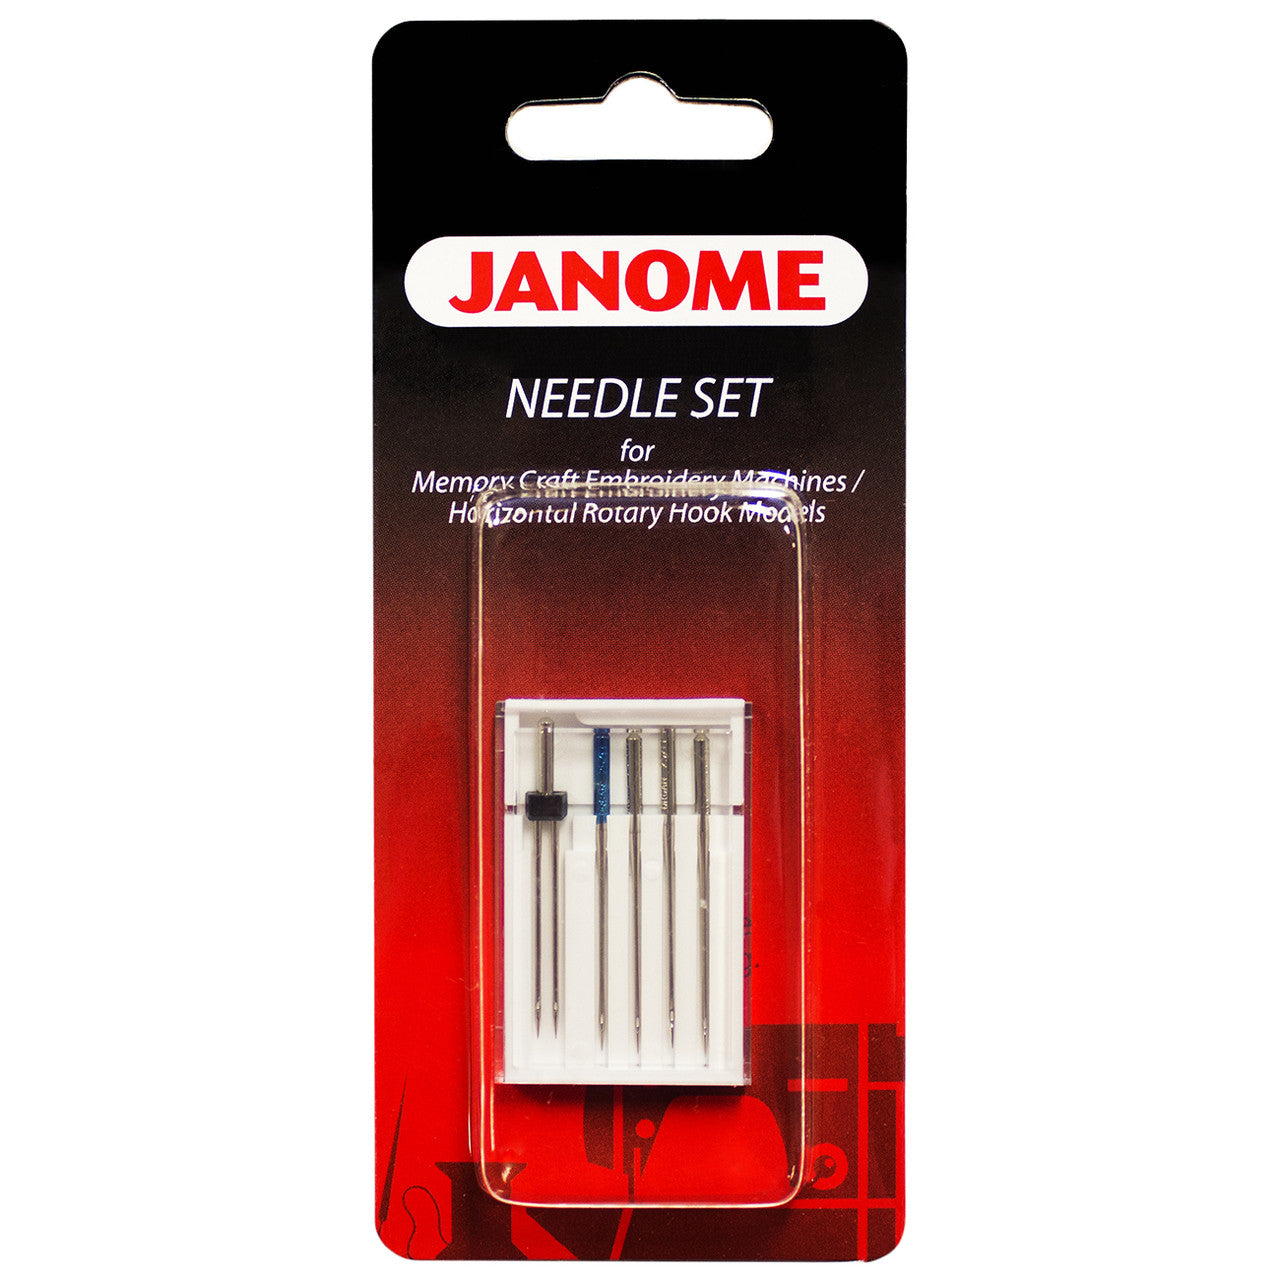 Janome Needle Set for Memory Craft Embroidery Machines and Horizontal Rotary Hook Models